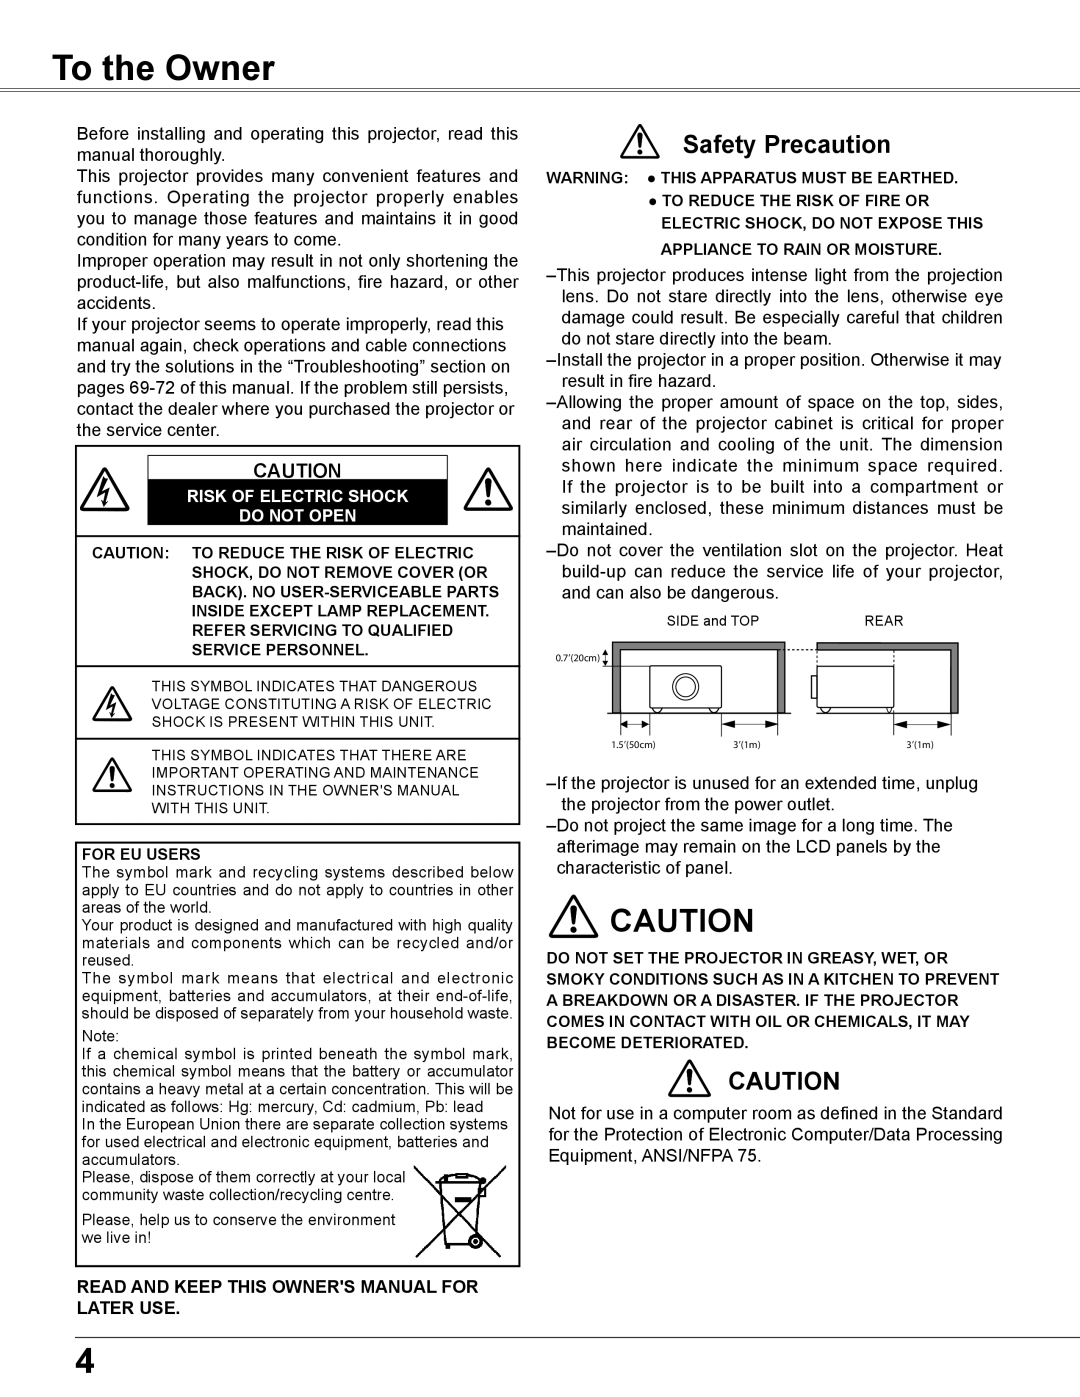 Sanyo WXU700A owner manual To the Owner, Safety Precaution, Risk Of Electric Shock Do Not Open 